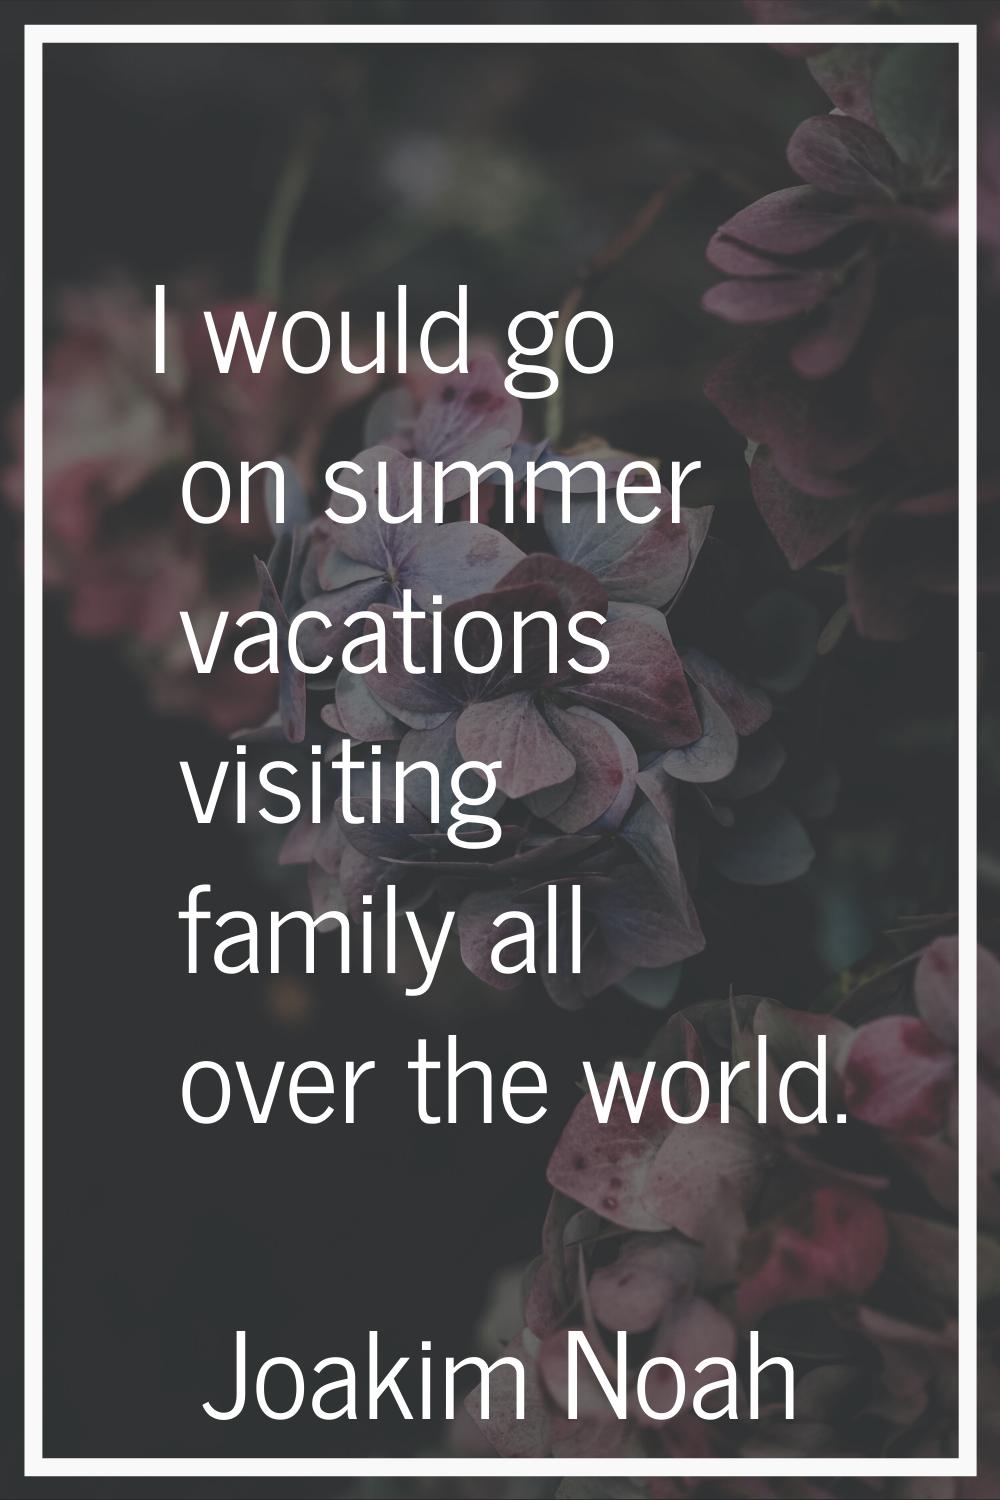 I would go on summer vacations visiting family all over the world.